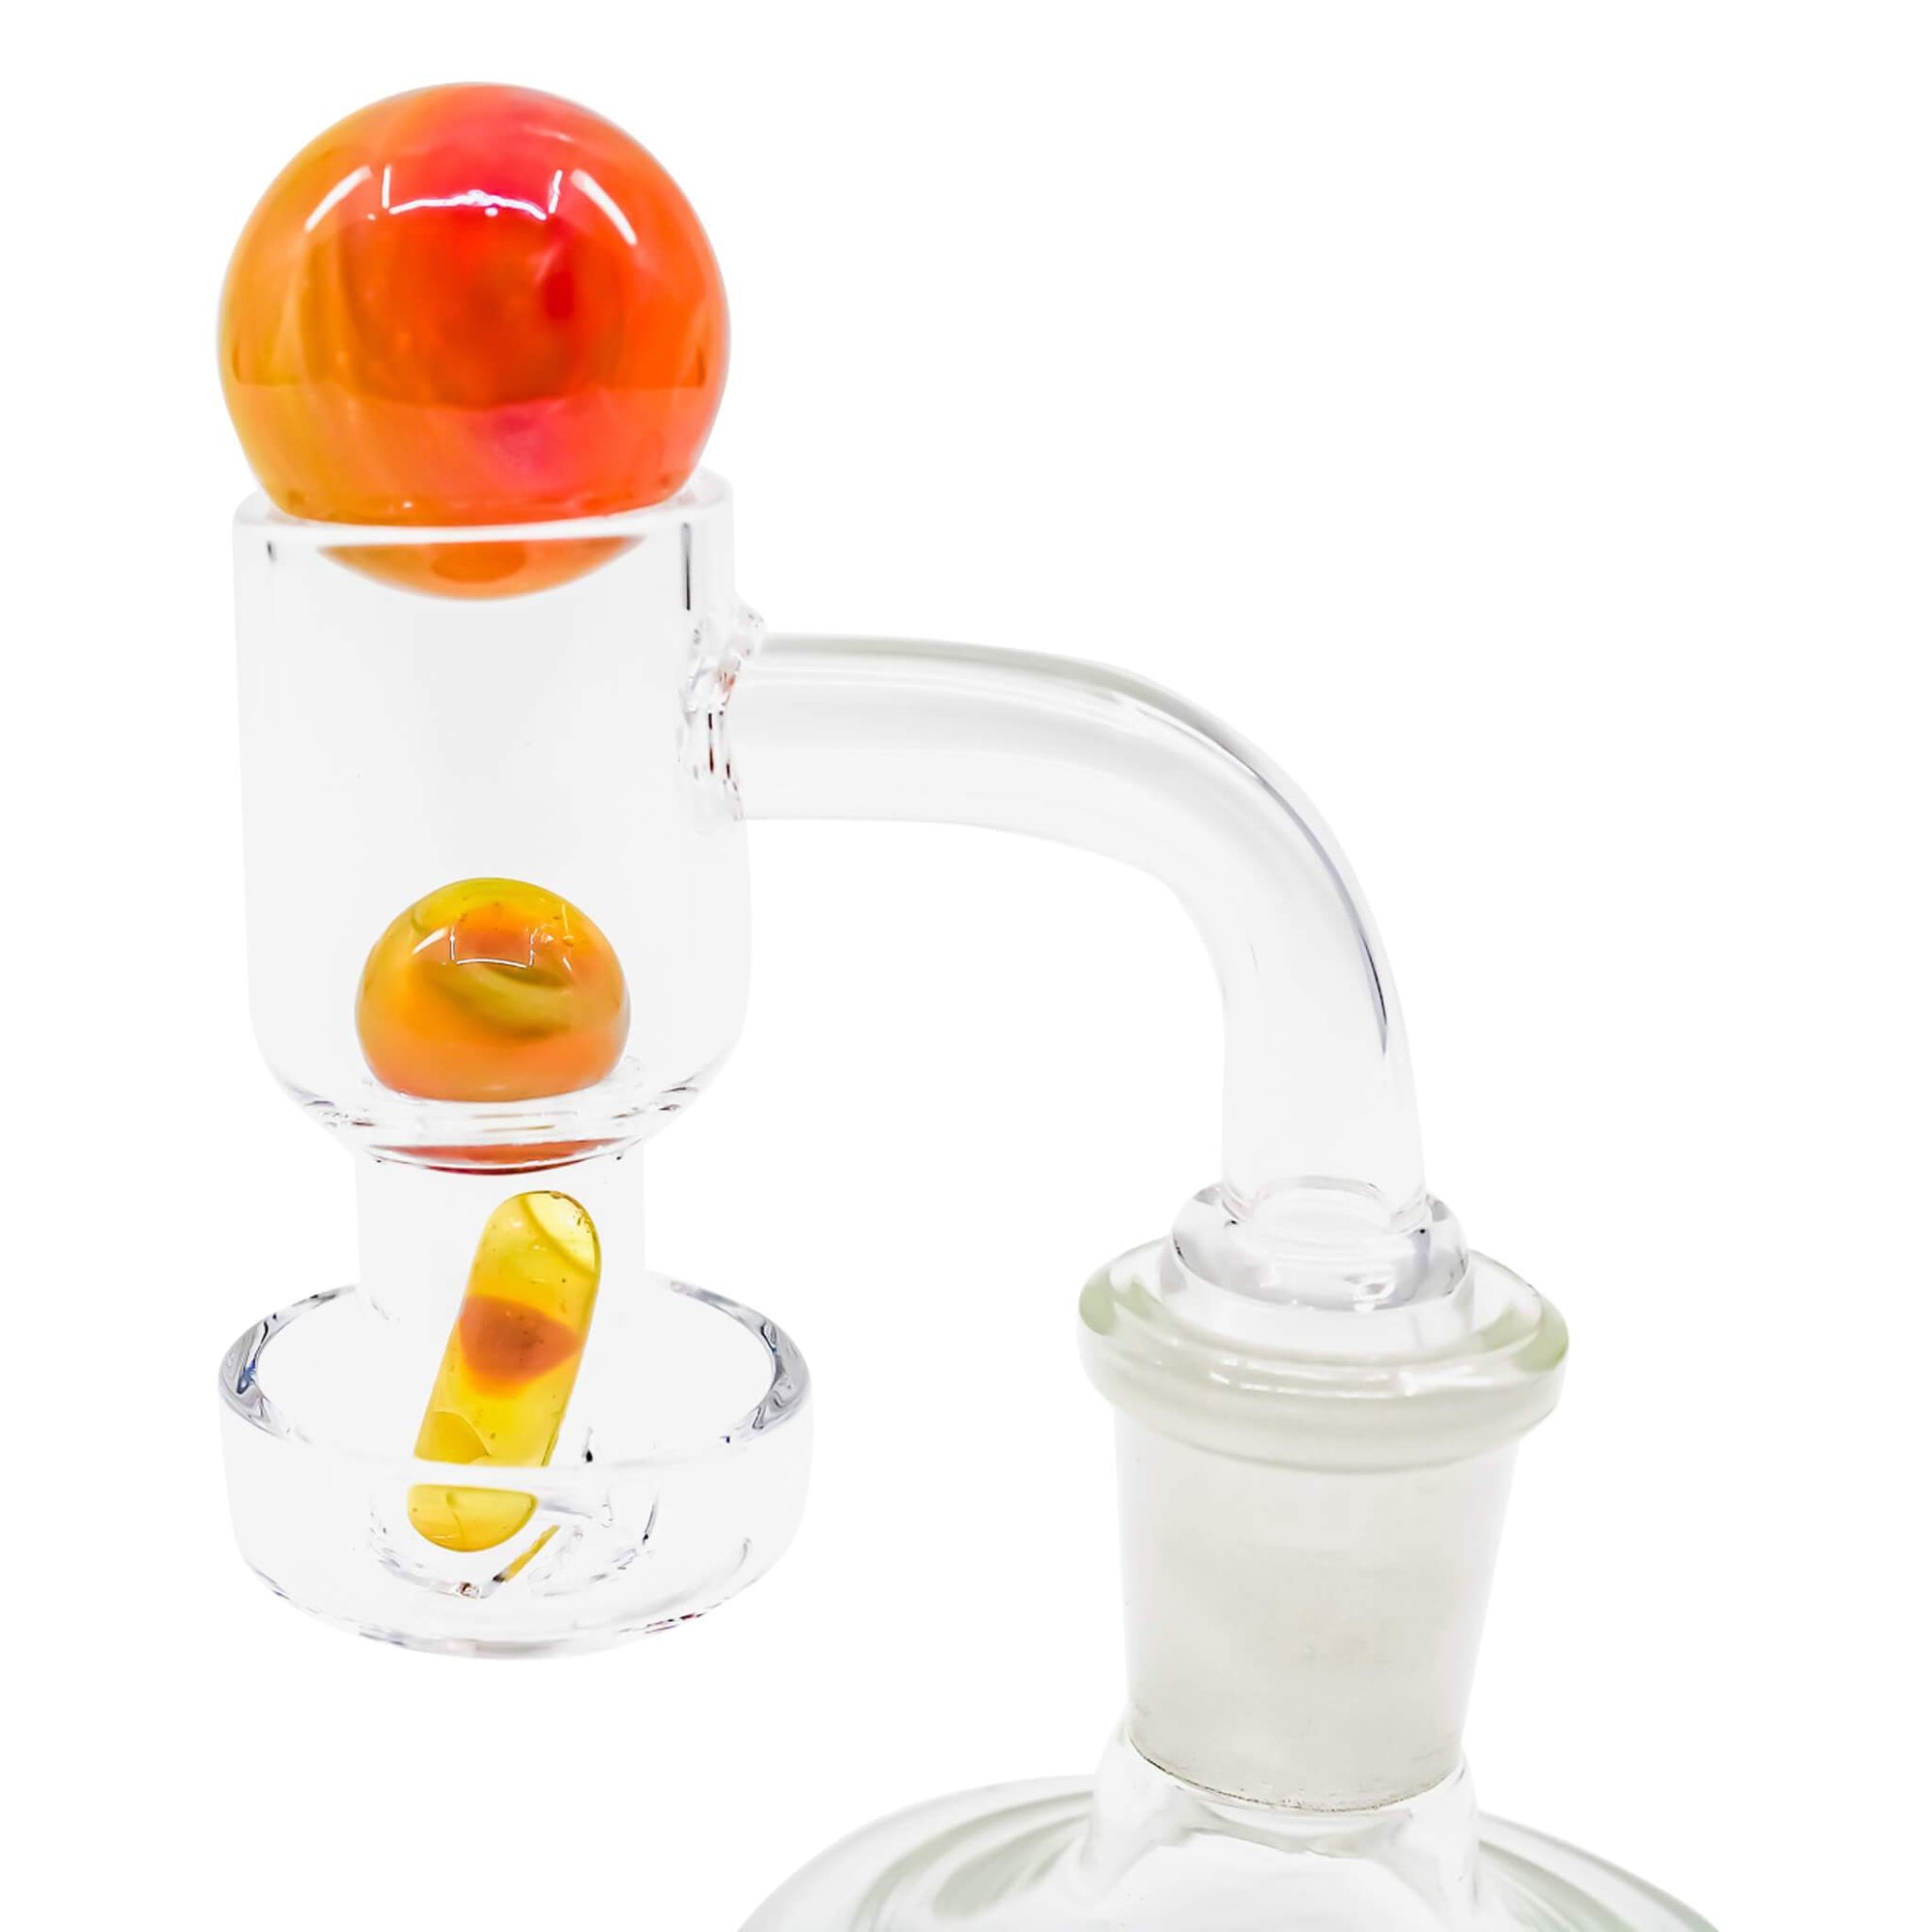 Buy Dabbing Accessories with 2-3 Day Shipping Nationwide